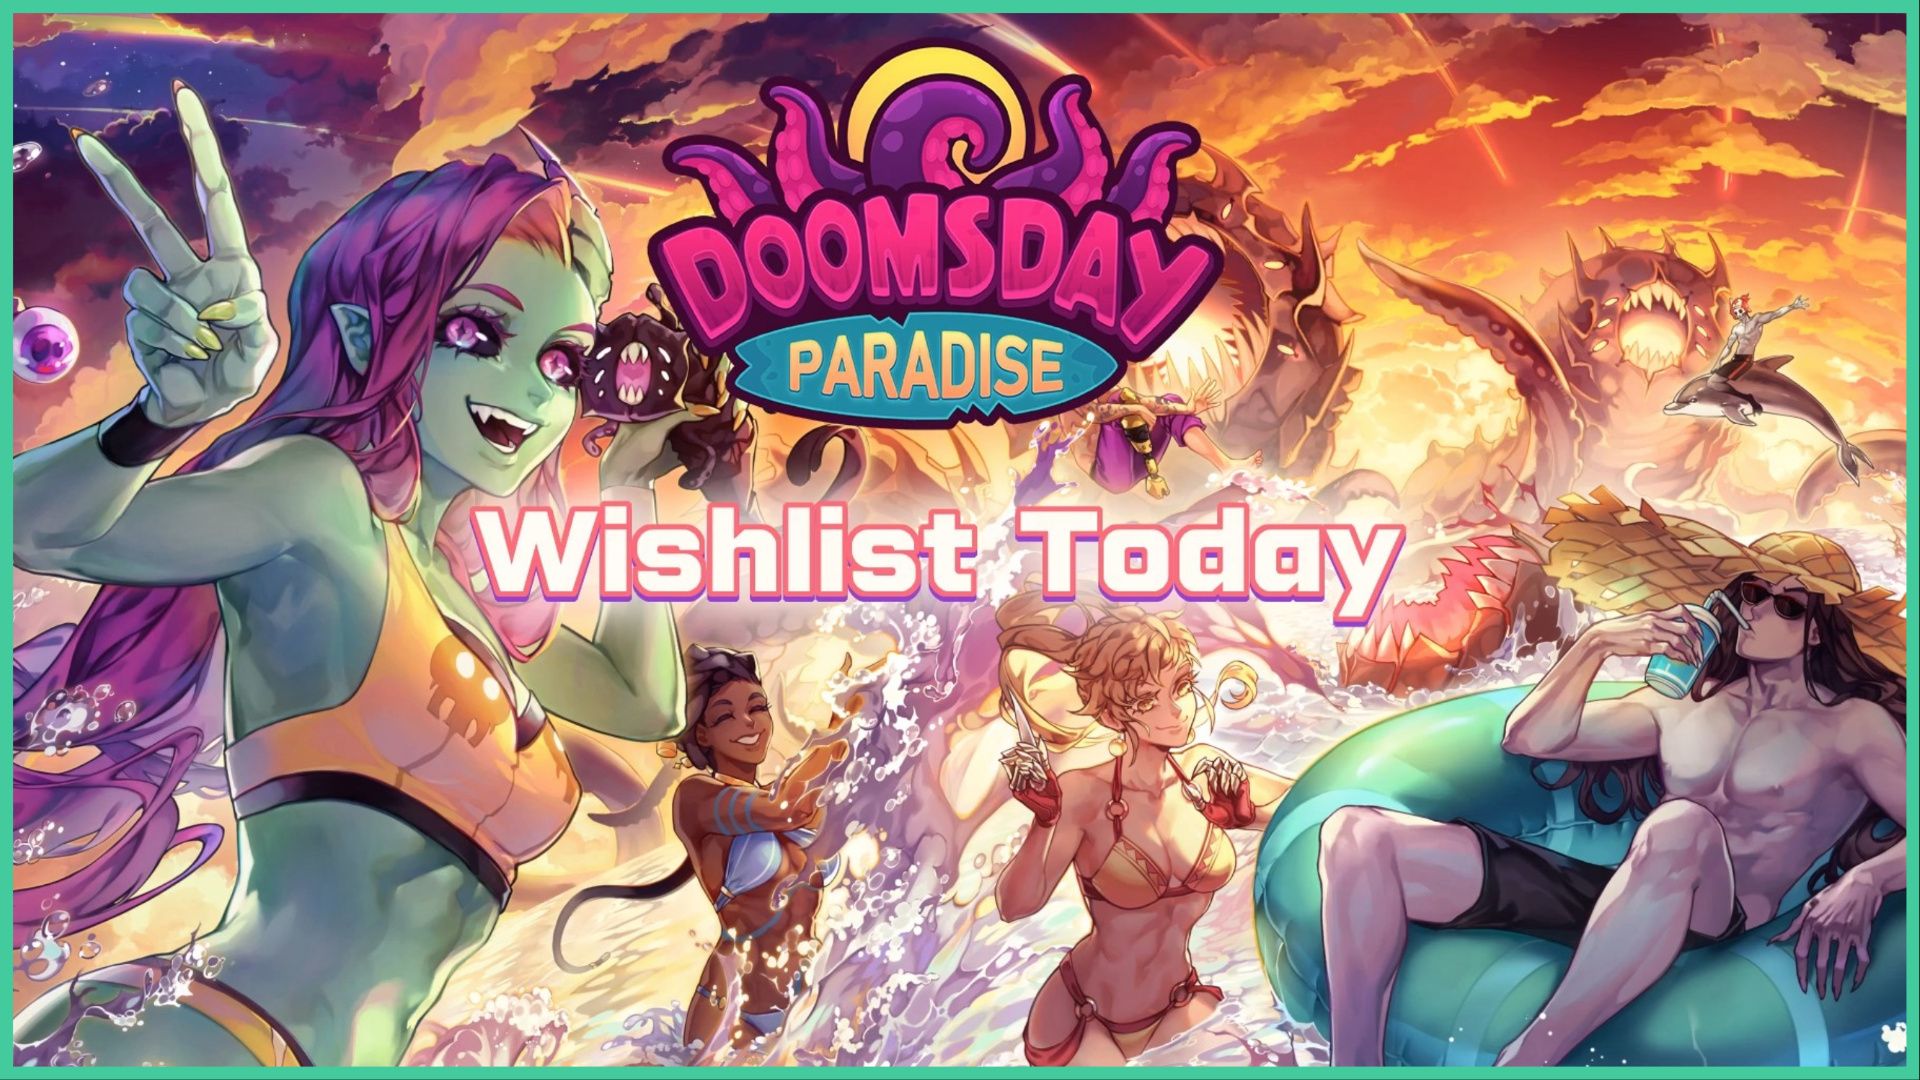 feature image for our doomsday paradise news, the image features promo art for the game with some members of the dateable cast as they have fun in the ocean, there are characters splashing the water, with a female character called haley stands at the front while smiling and throwing a peace sign as she holds a monster while another wears a sunhat and sunglasses as he floats on a pool float while sipping a drink, there is also a character riding a dolphin in the distance, however, there are monsters in the distance